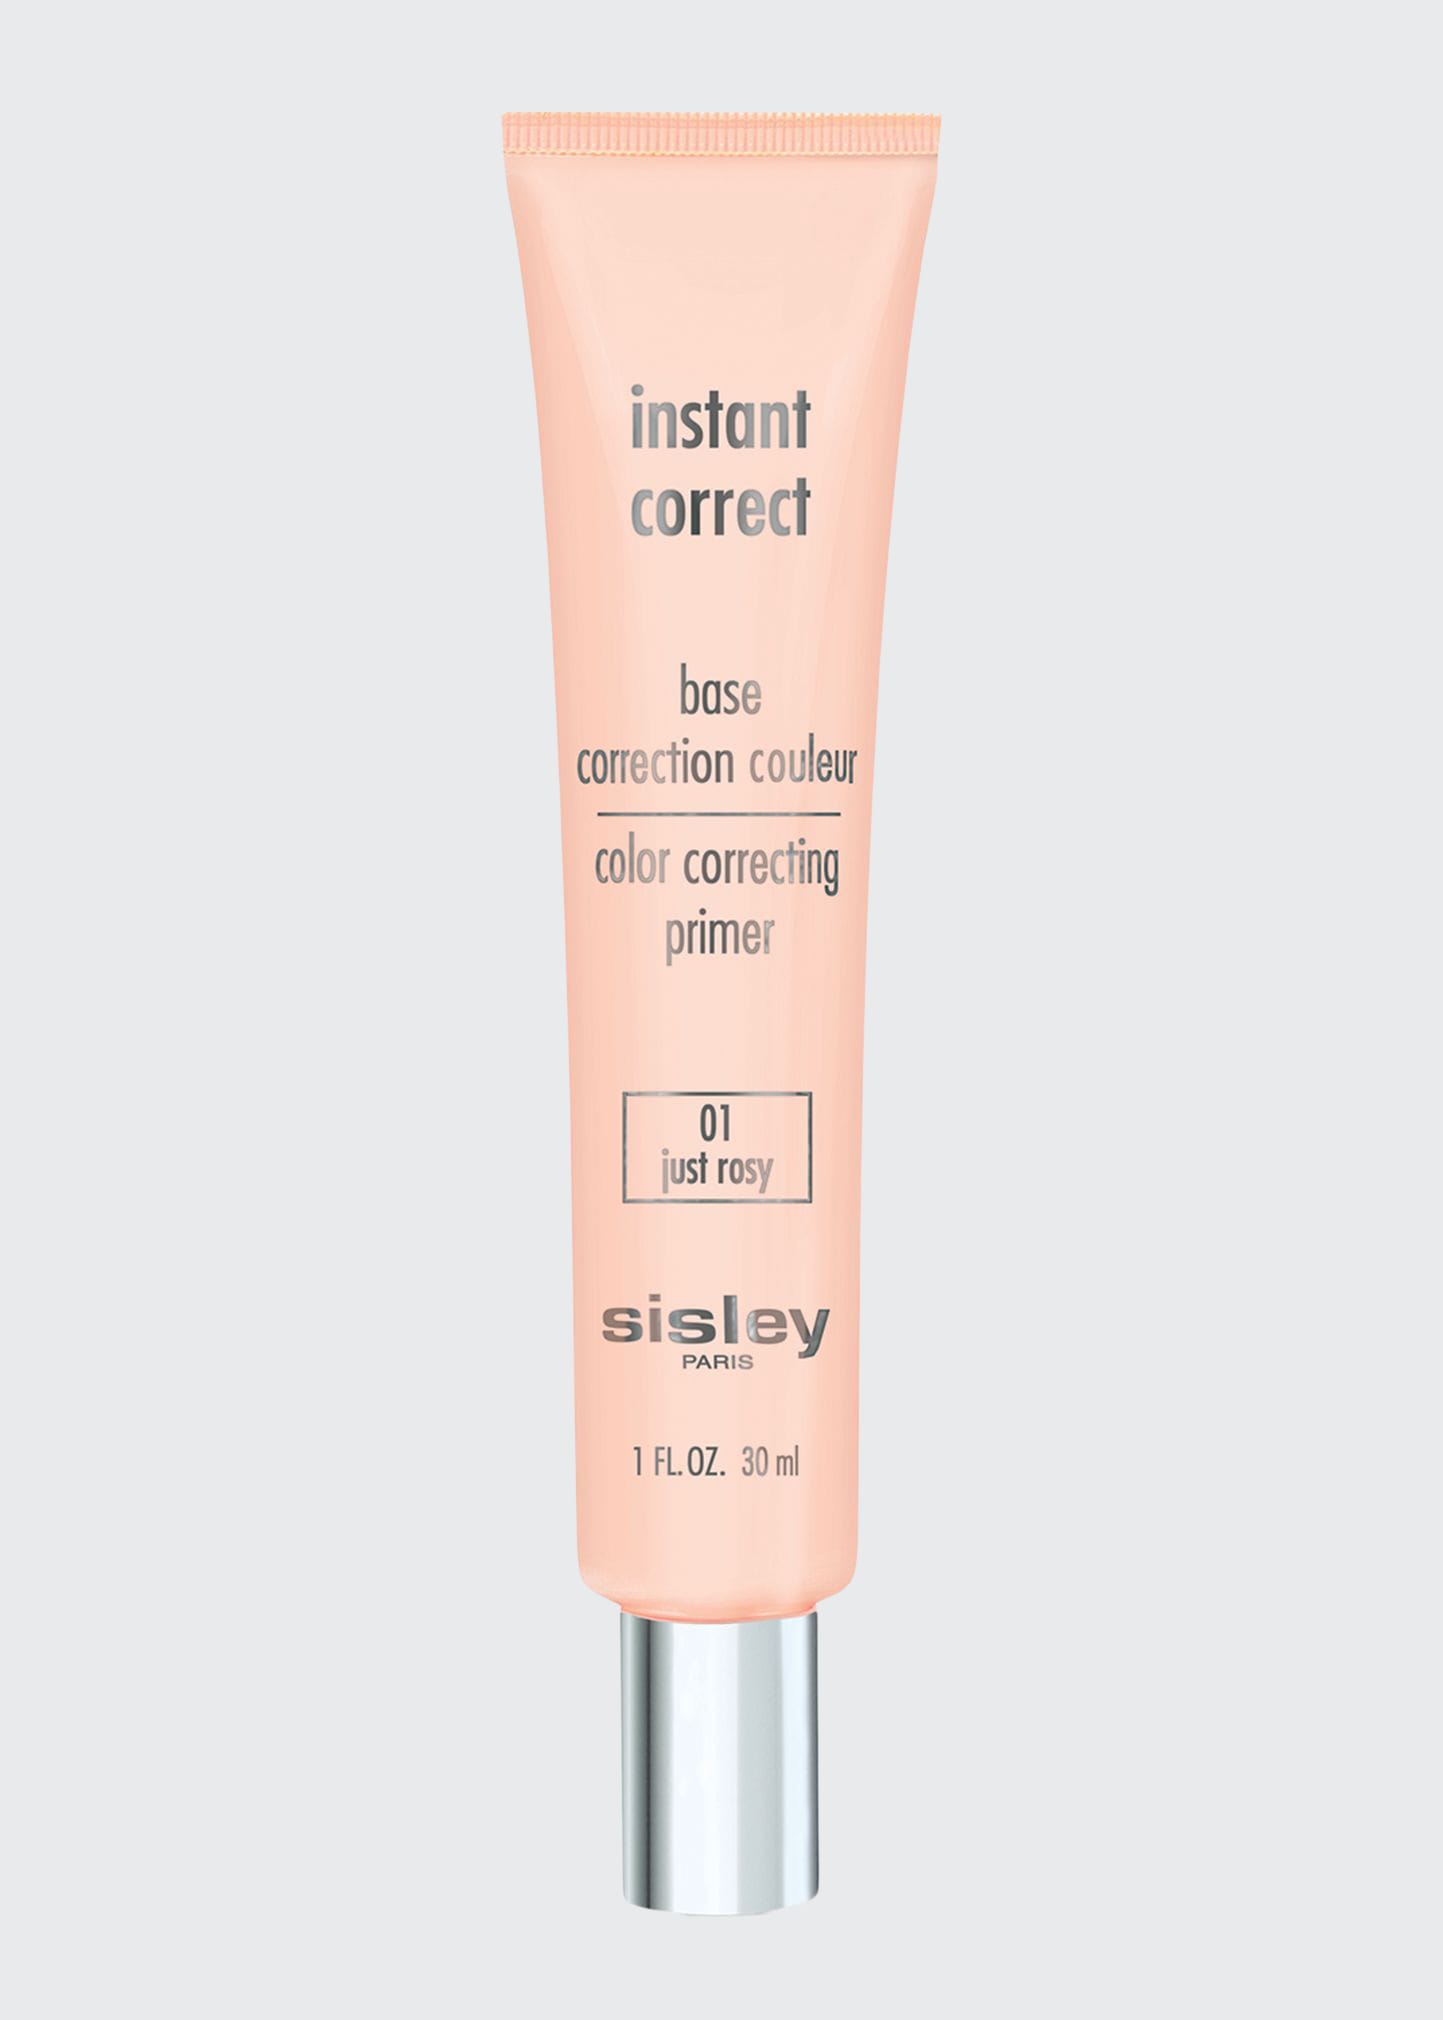 Sisley Paris Instant Correct In 1 - Just Rosy